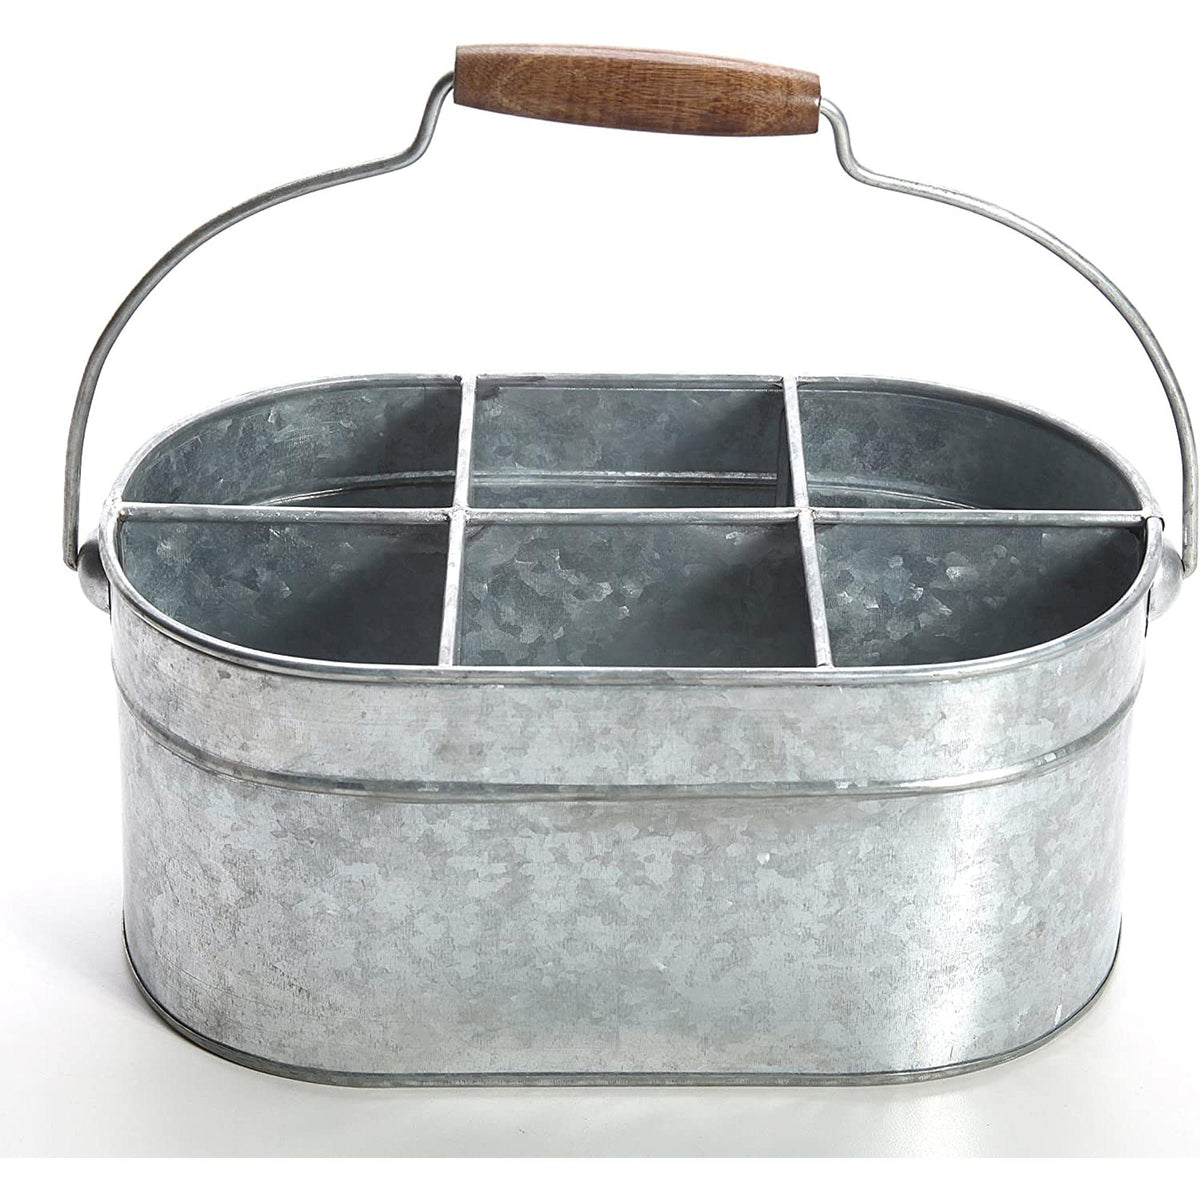 HOSLEY® Iron Galvanized Carry All Kitchen Utensil Caddy Serve Ware, 13 inches Long